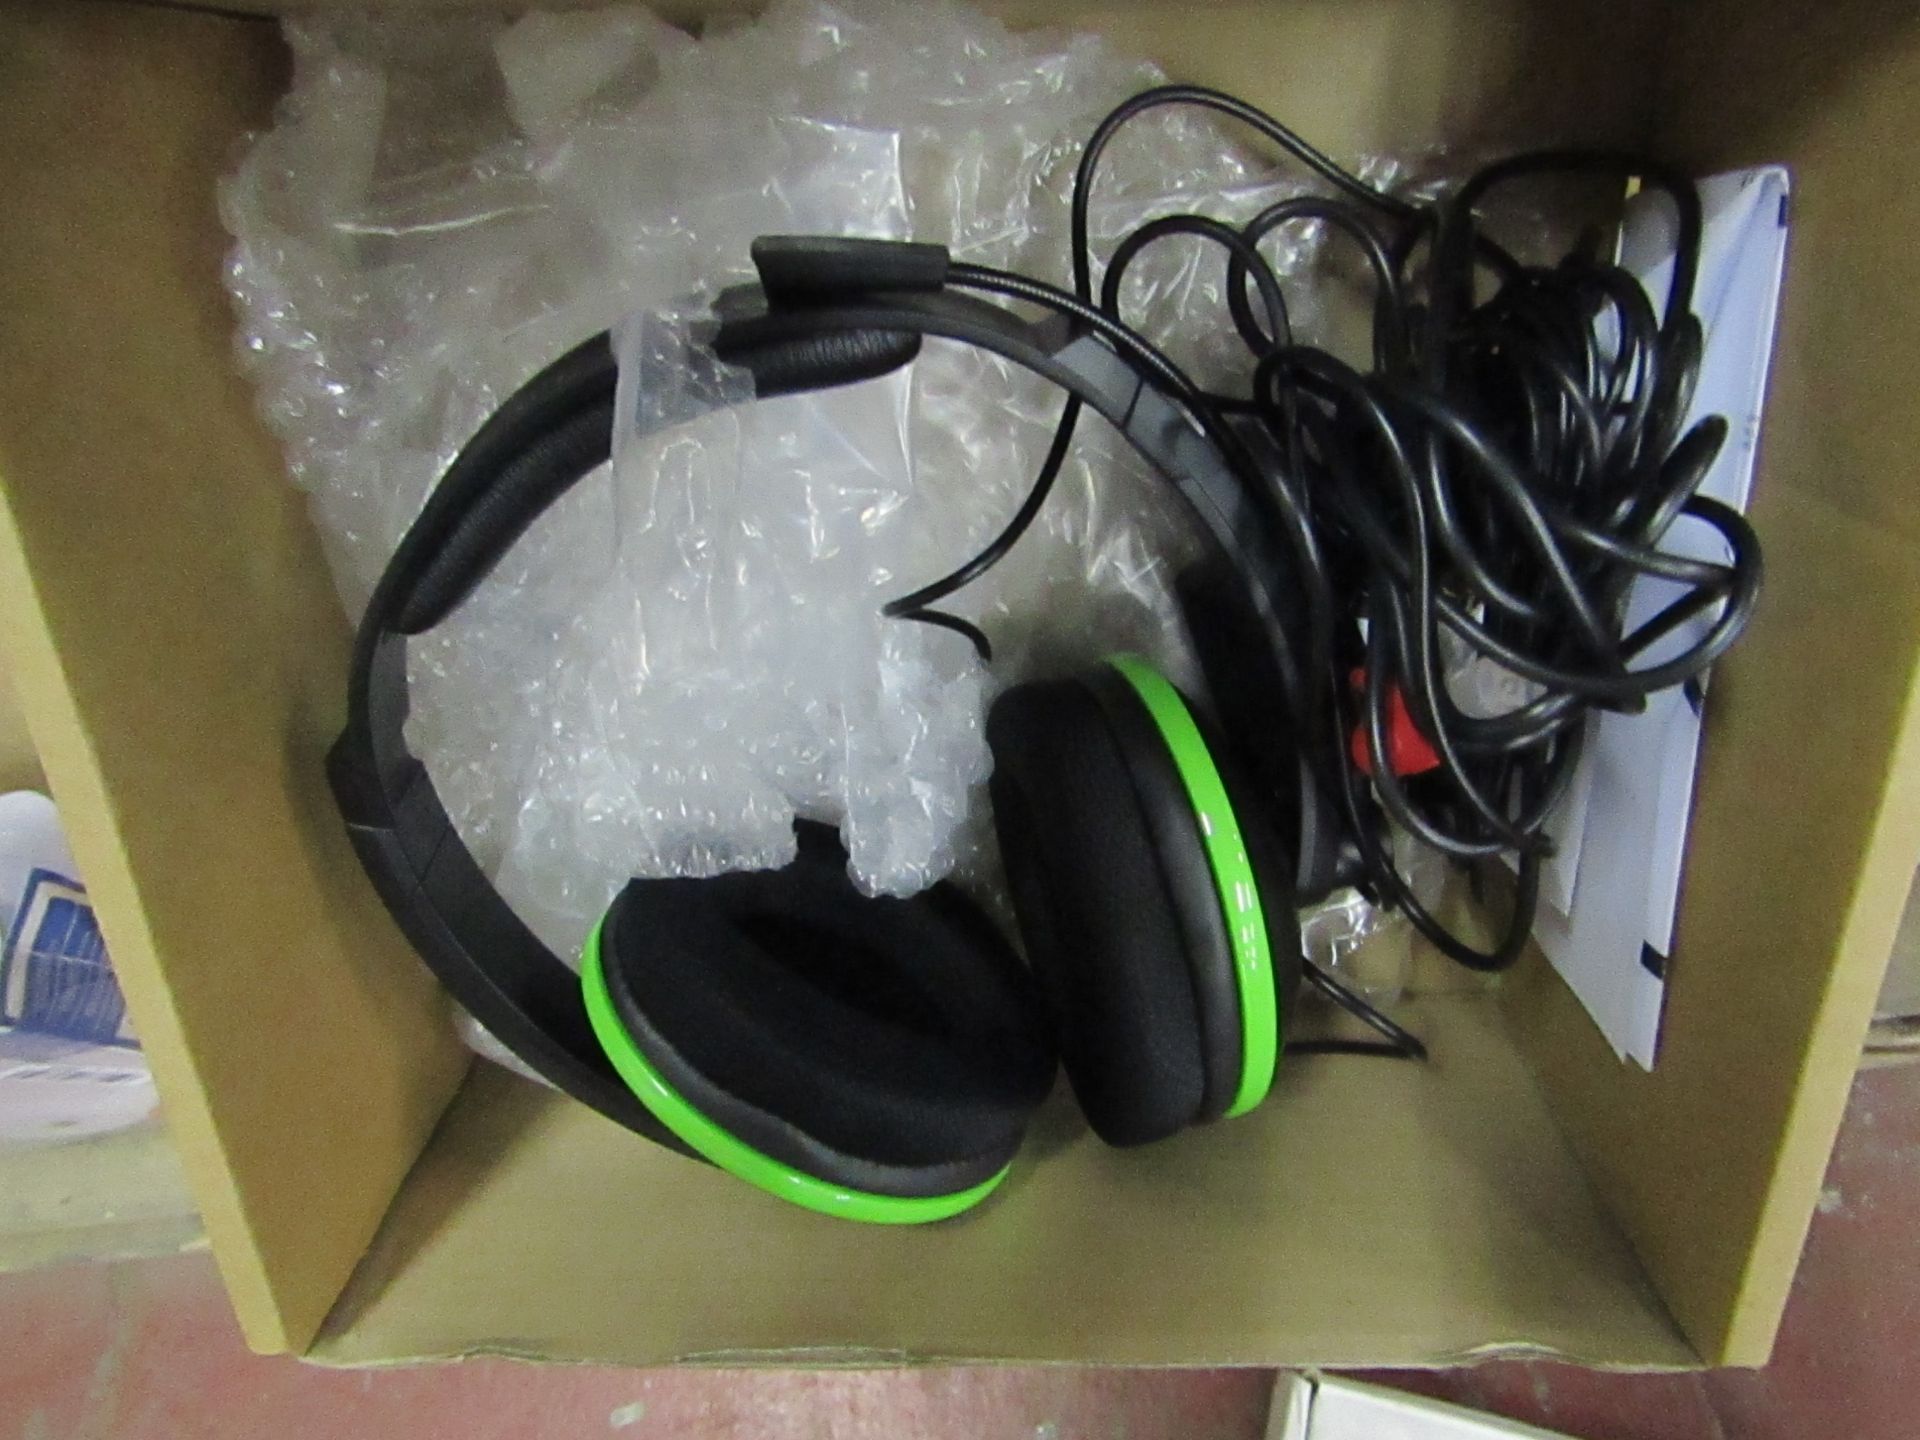 Turtle Beach Earforce XL1 amplified gaming headset, untested and boxed.